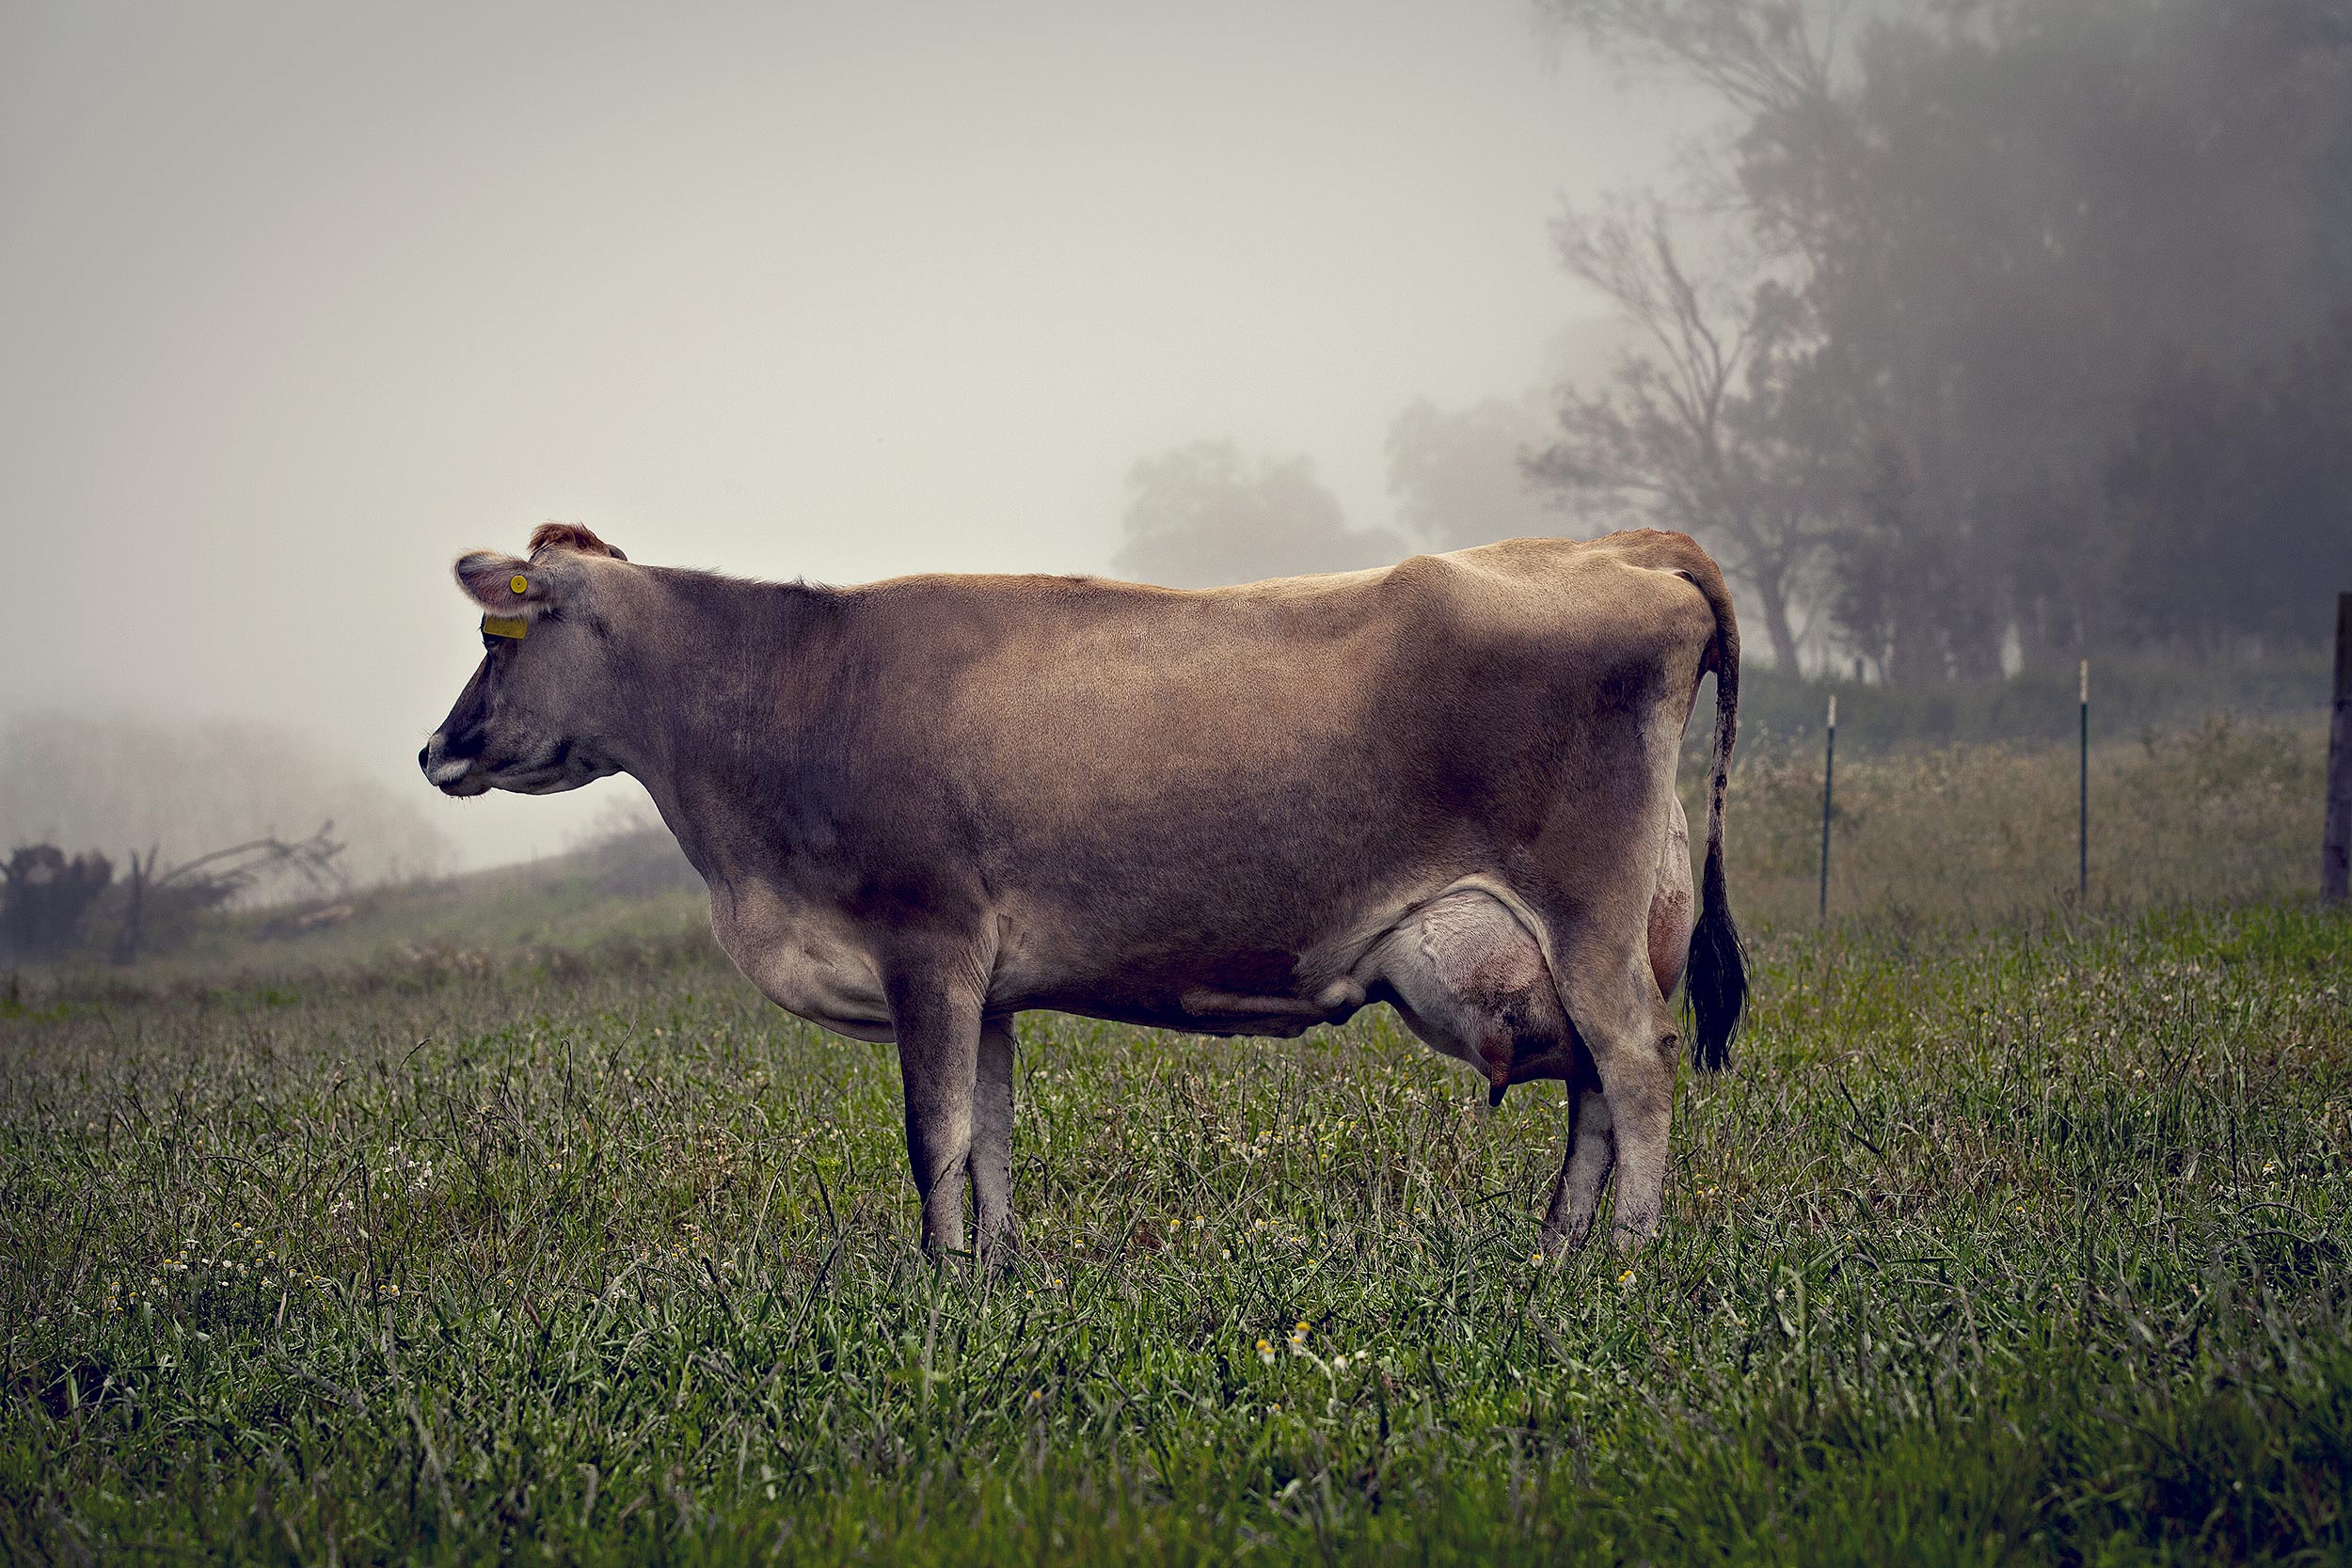 Agriculture Photography diary cow in foggy field